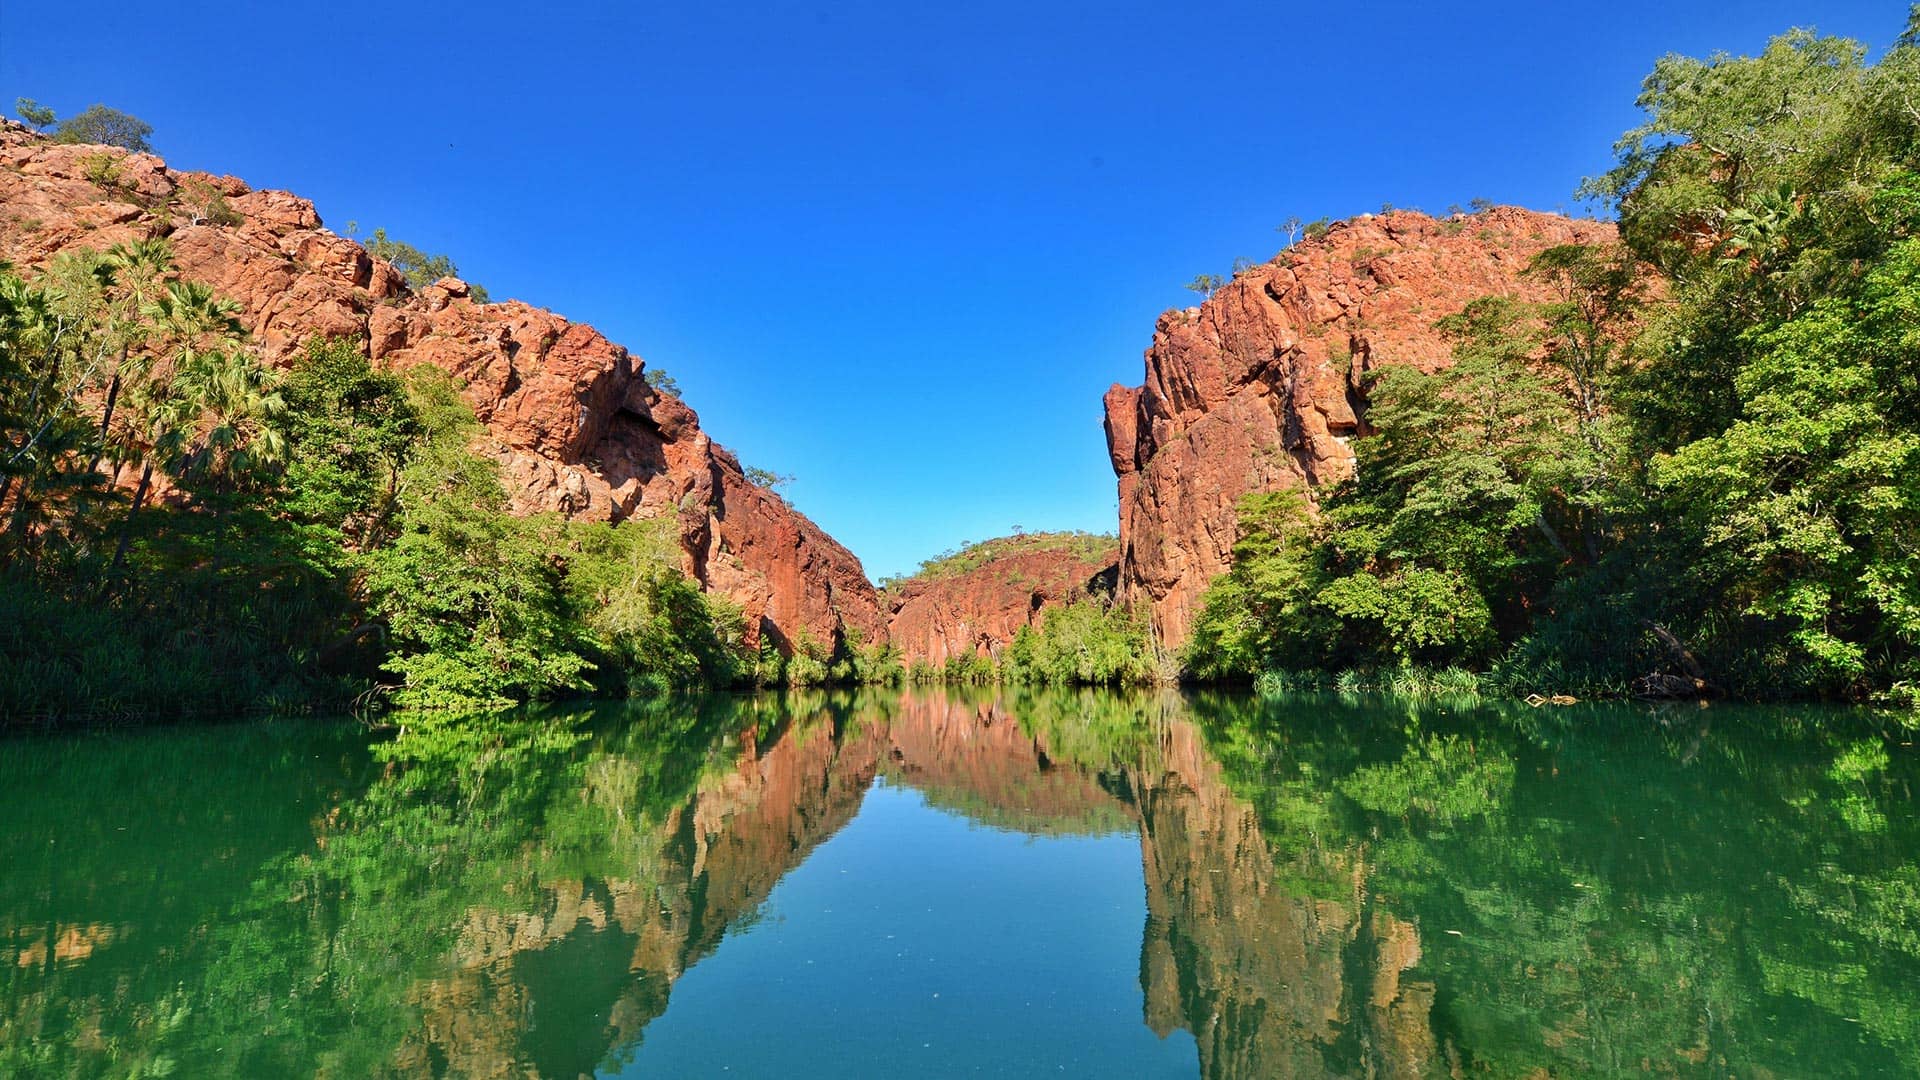 tour outback qld